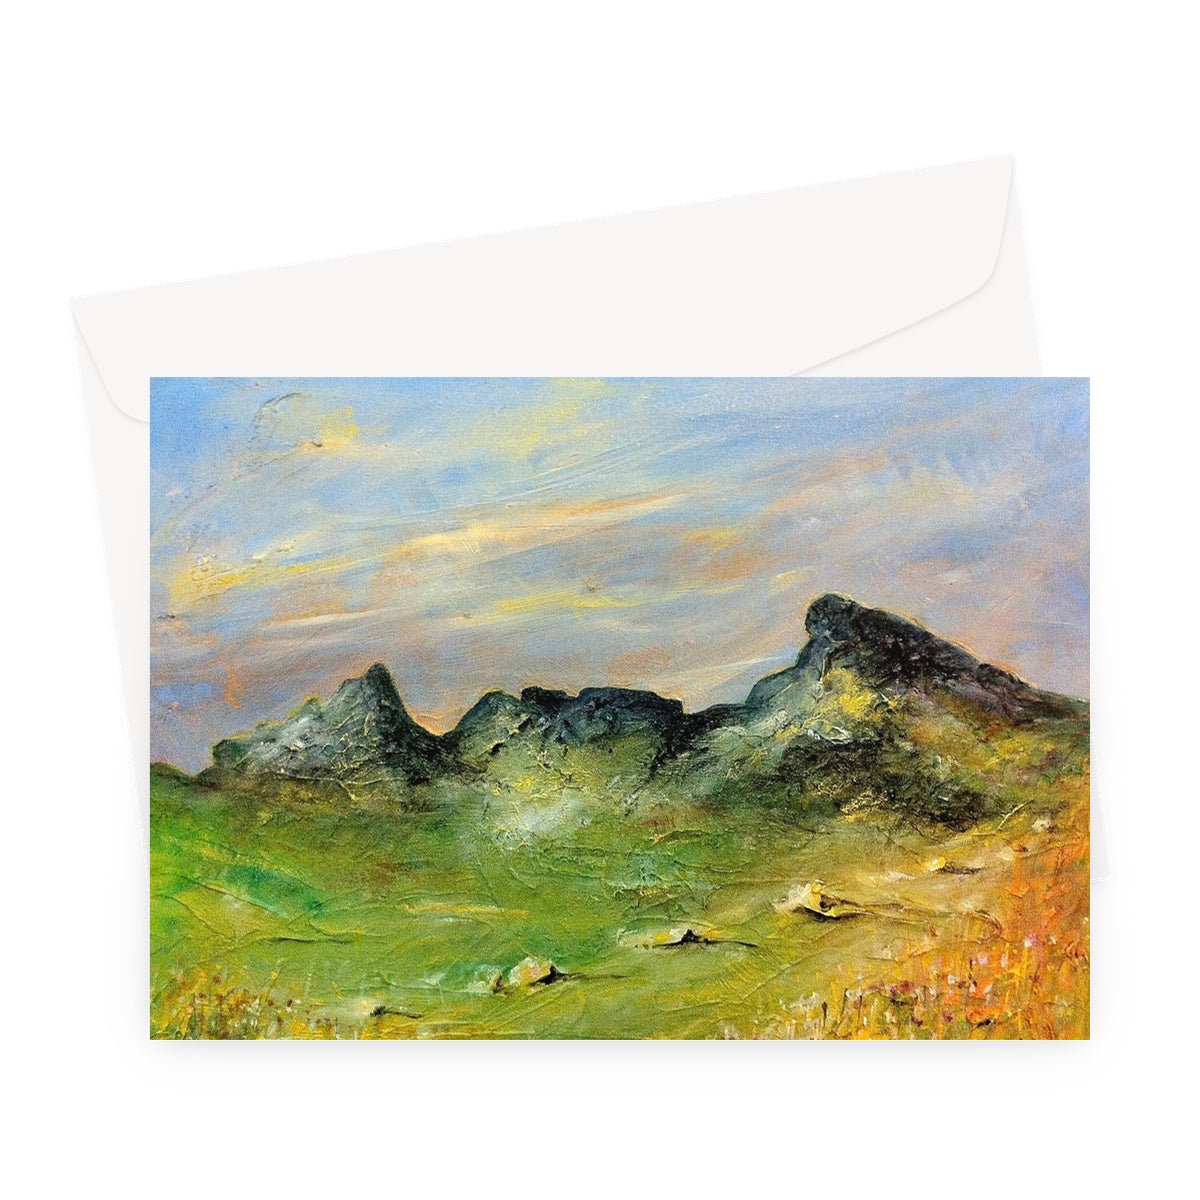 The Cobbler Art Gifts Greeting Card-Stationery-Scottish Lochs & Mountains Art Gallery-A5 Landscape-1 Card-Paintings, Prints, Homeware, Art Gifts From Scotland By Scottish Artist Kevin Hunter